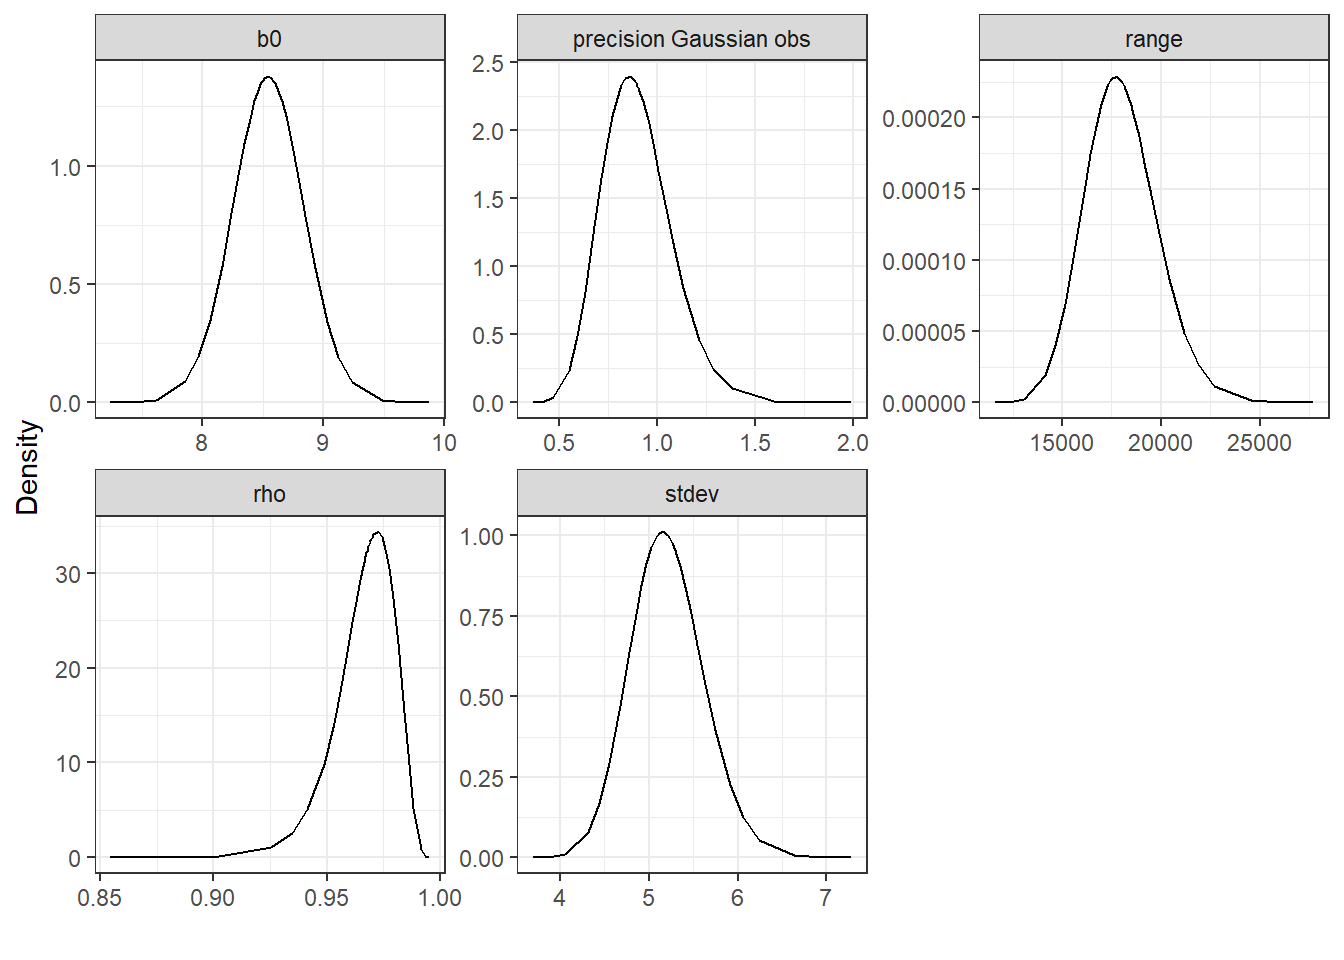 Posterior distributions of the model parameters.